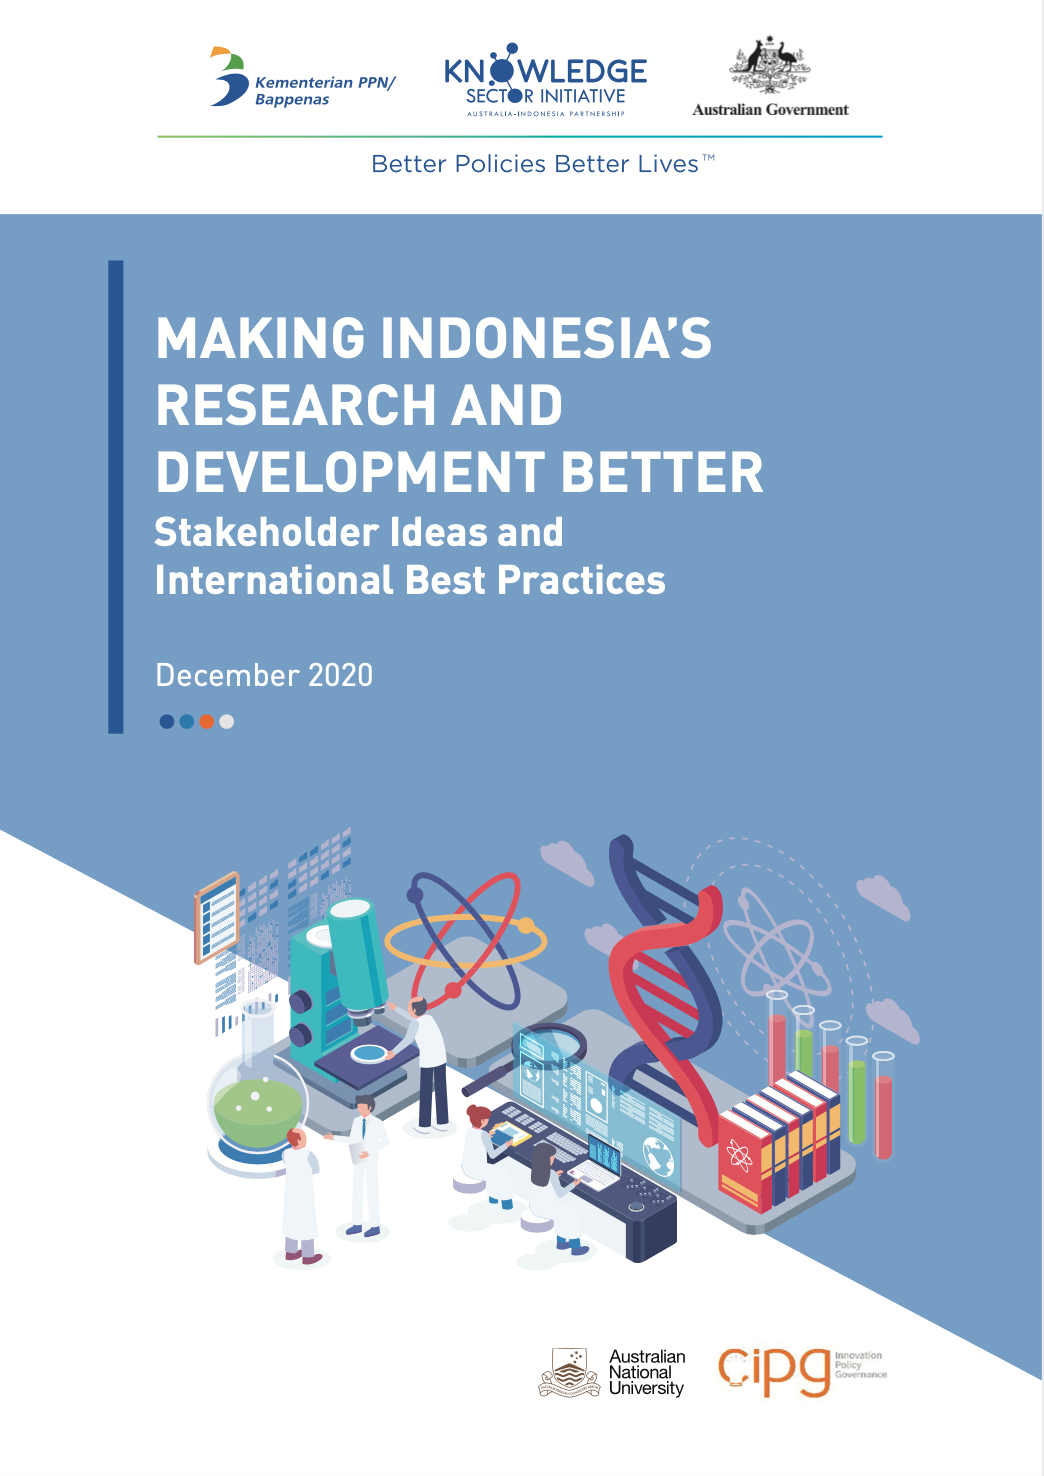 Making Indonesia's Research and Development Better: Stakeholder Ideas and International Best Practices